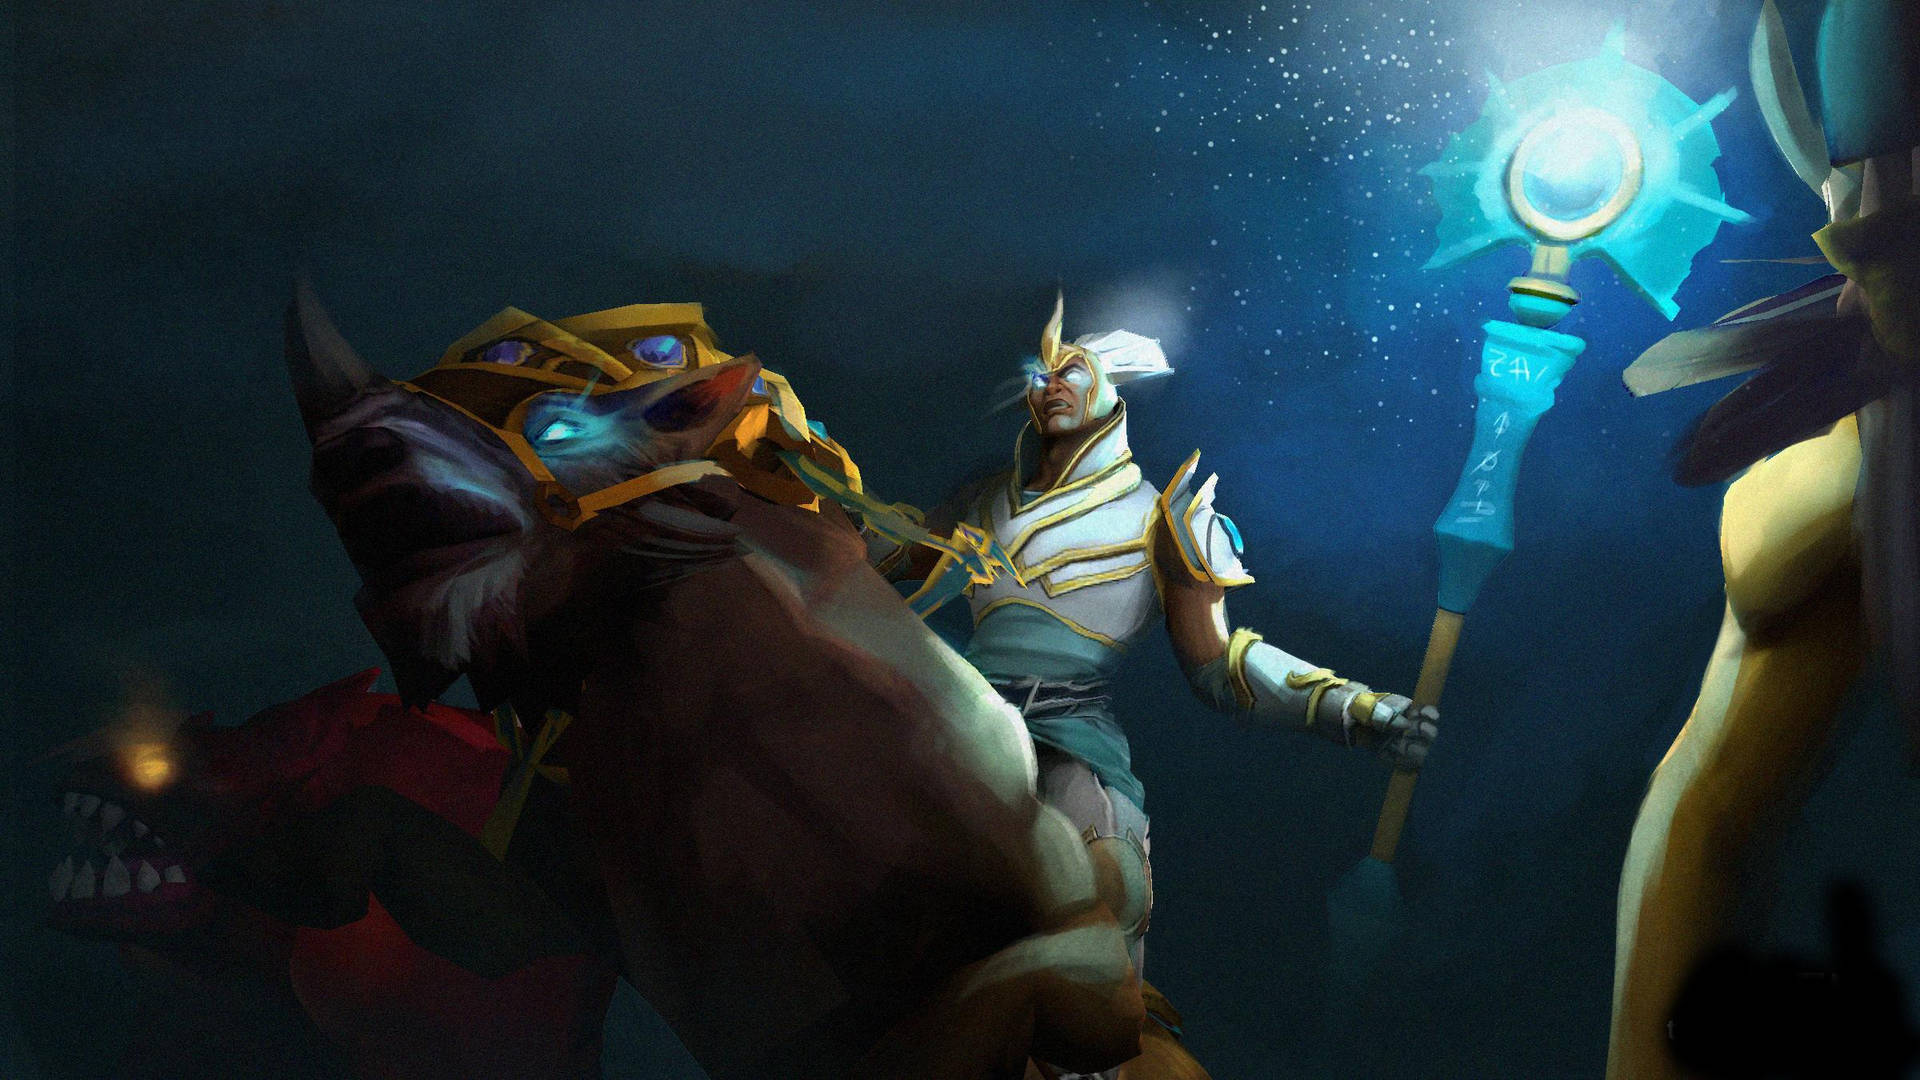 2400X1350 Dota 2 Wallpaper and Background